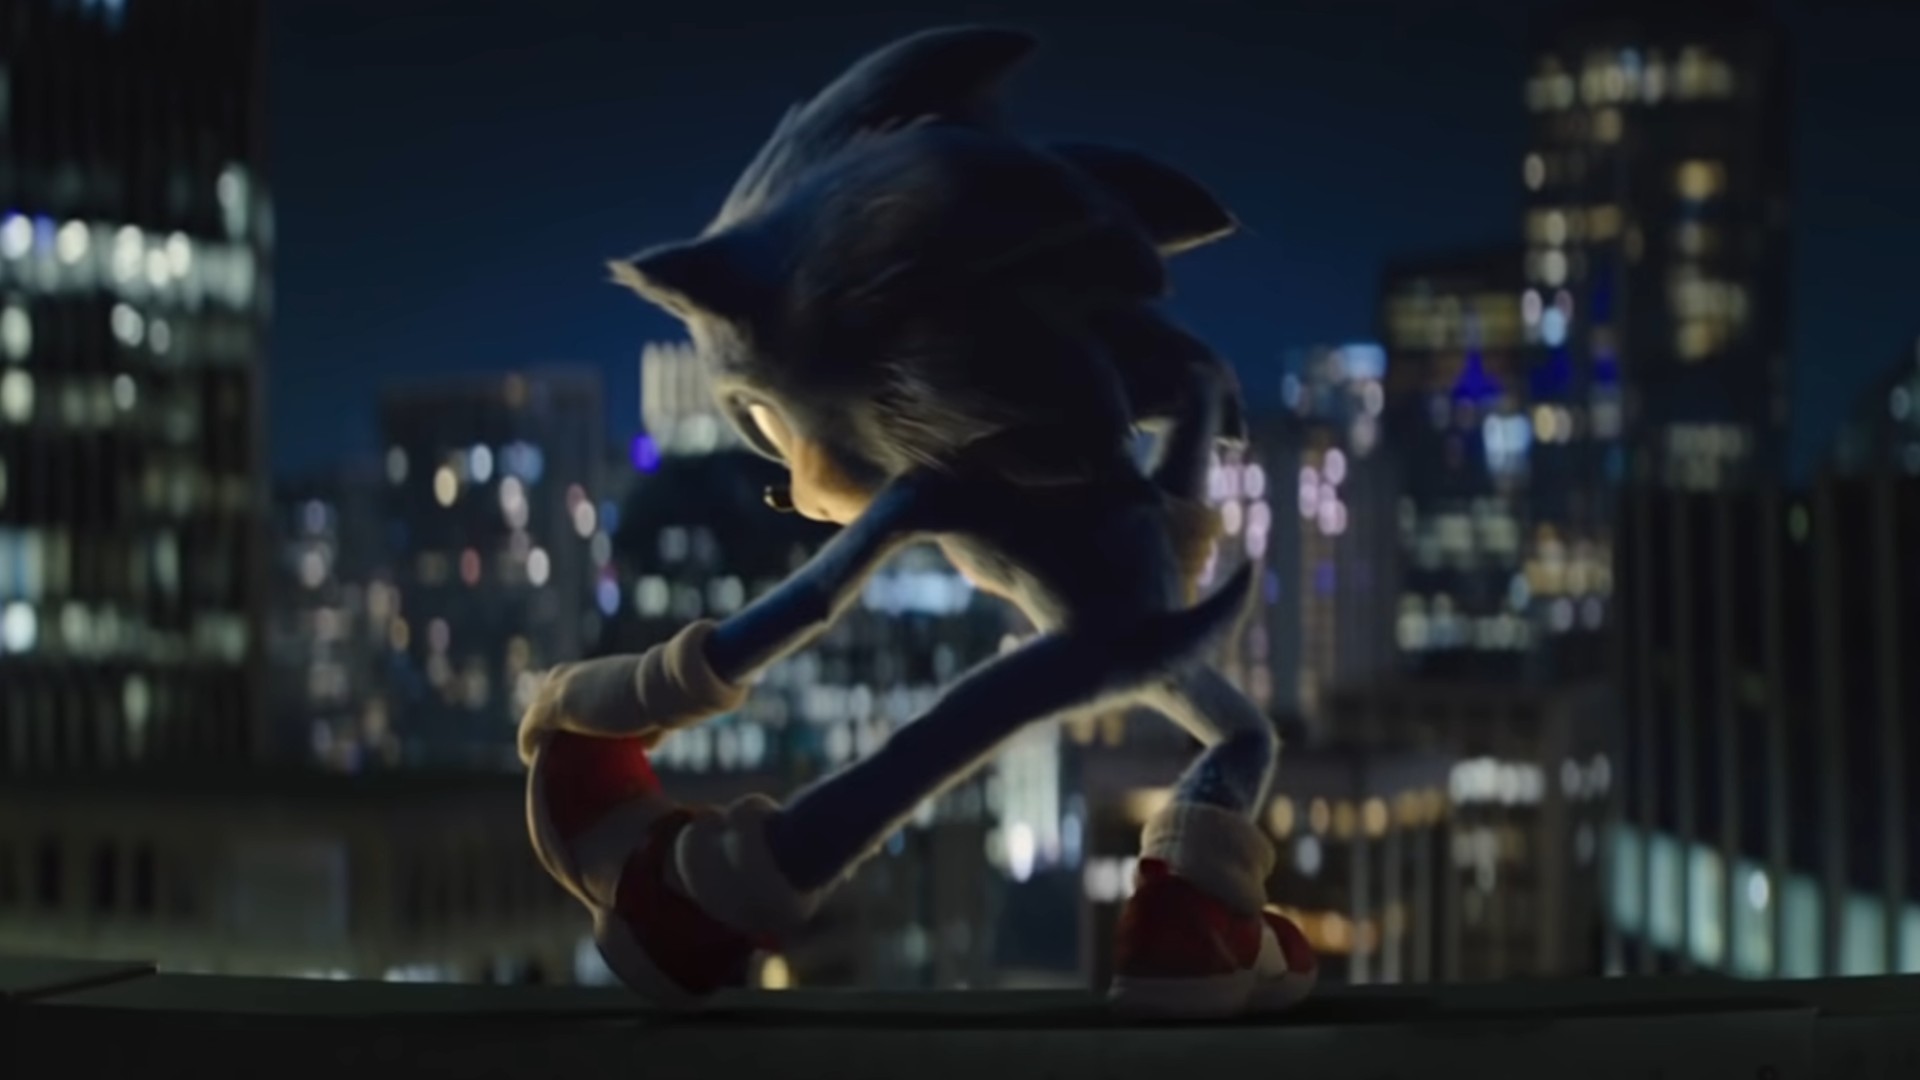 Sonic the Hedgehog 2 (2022) directed by Jeff Fowler • Reviews, film + cast  • Letterboxd